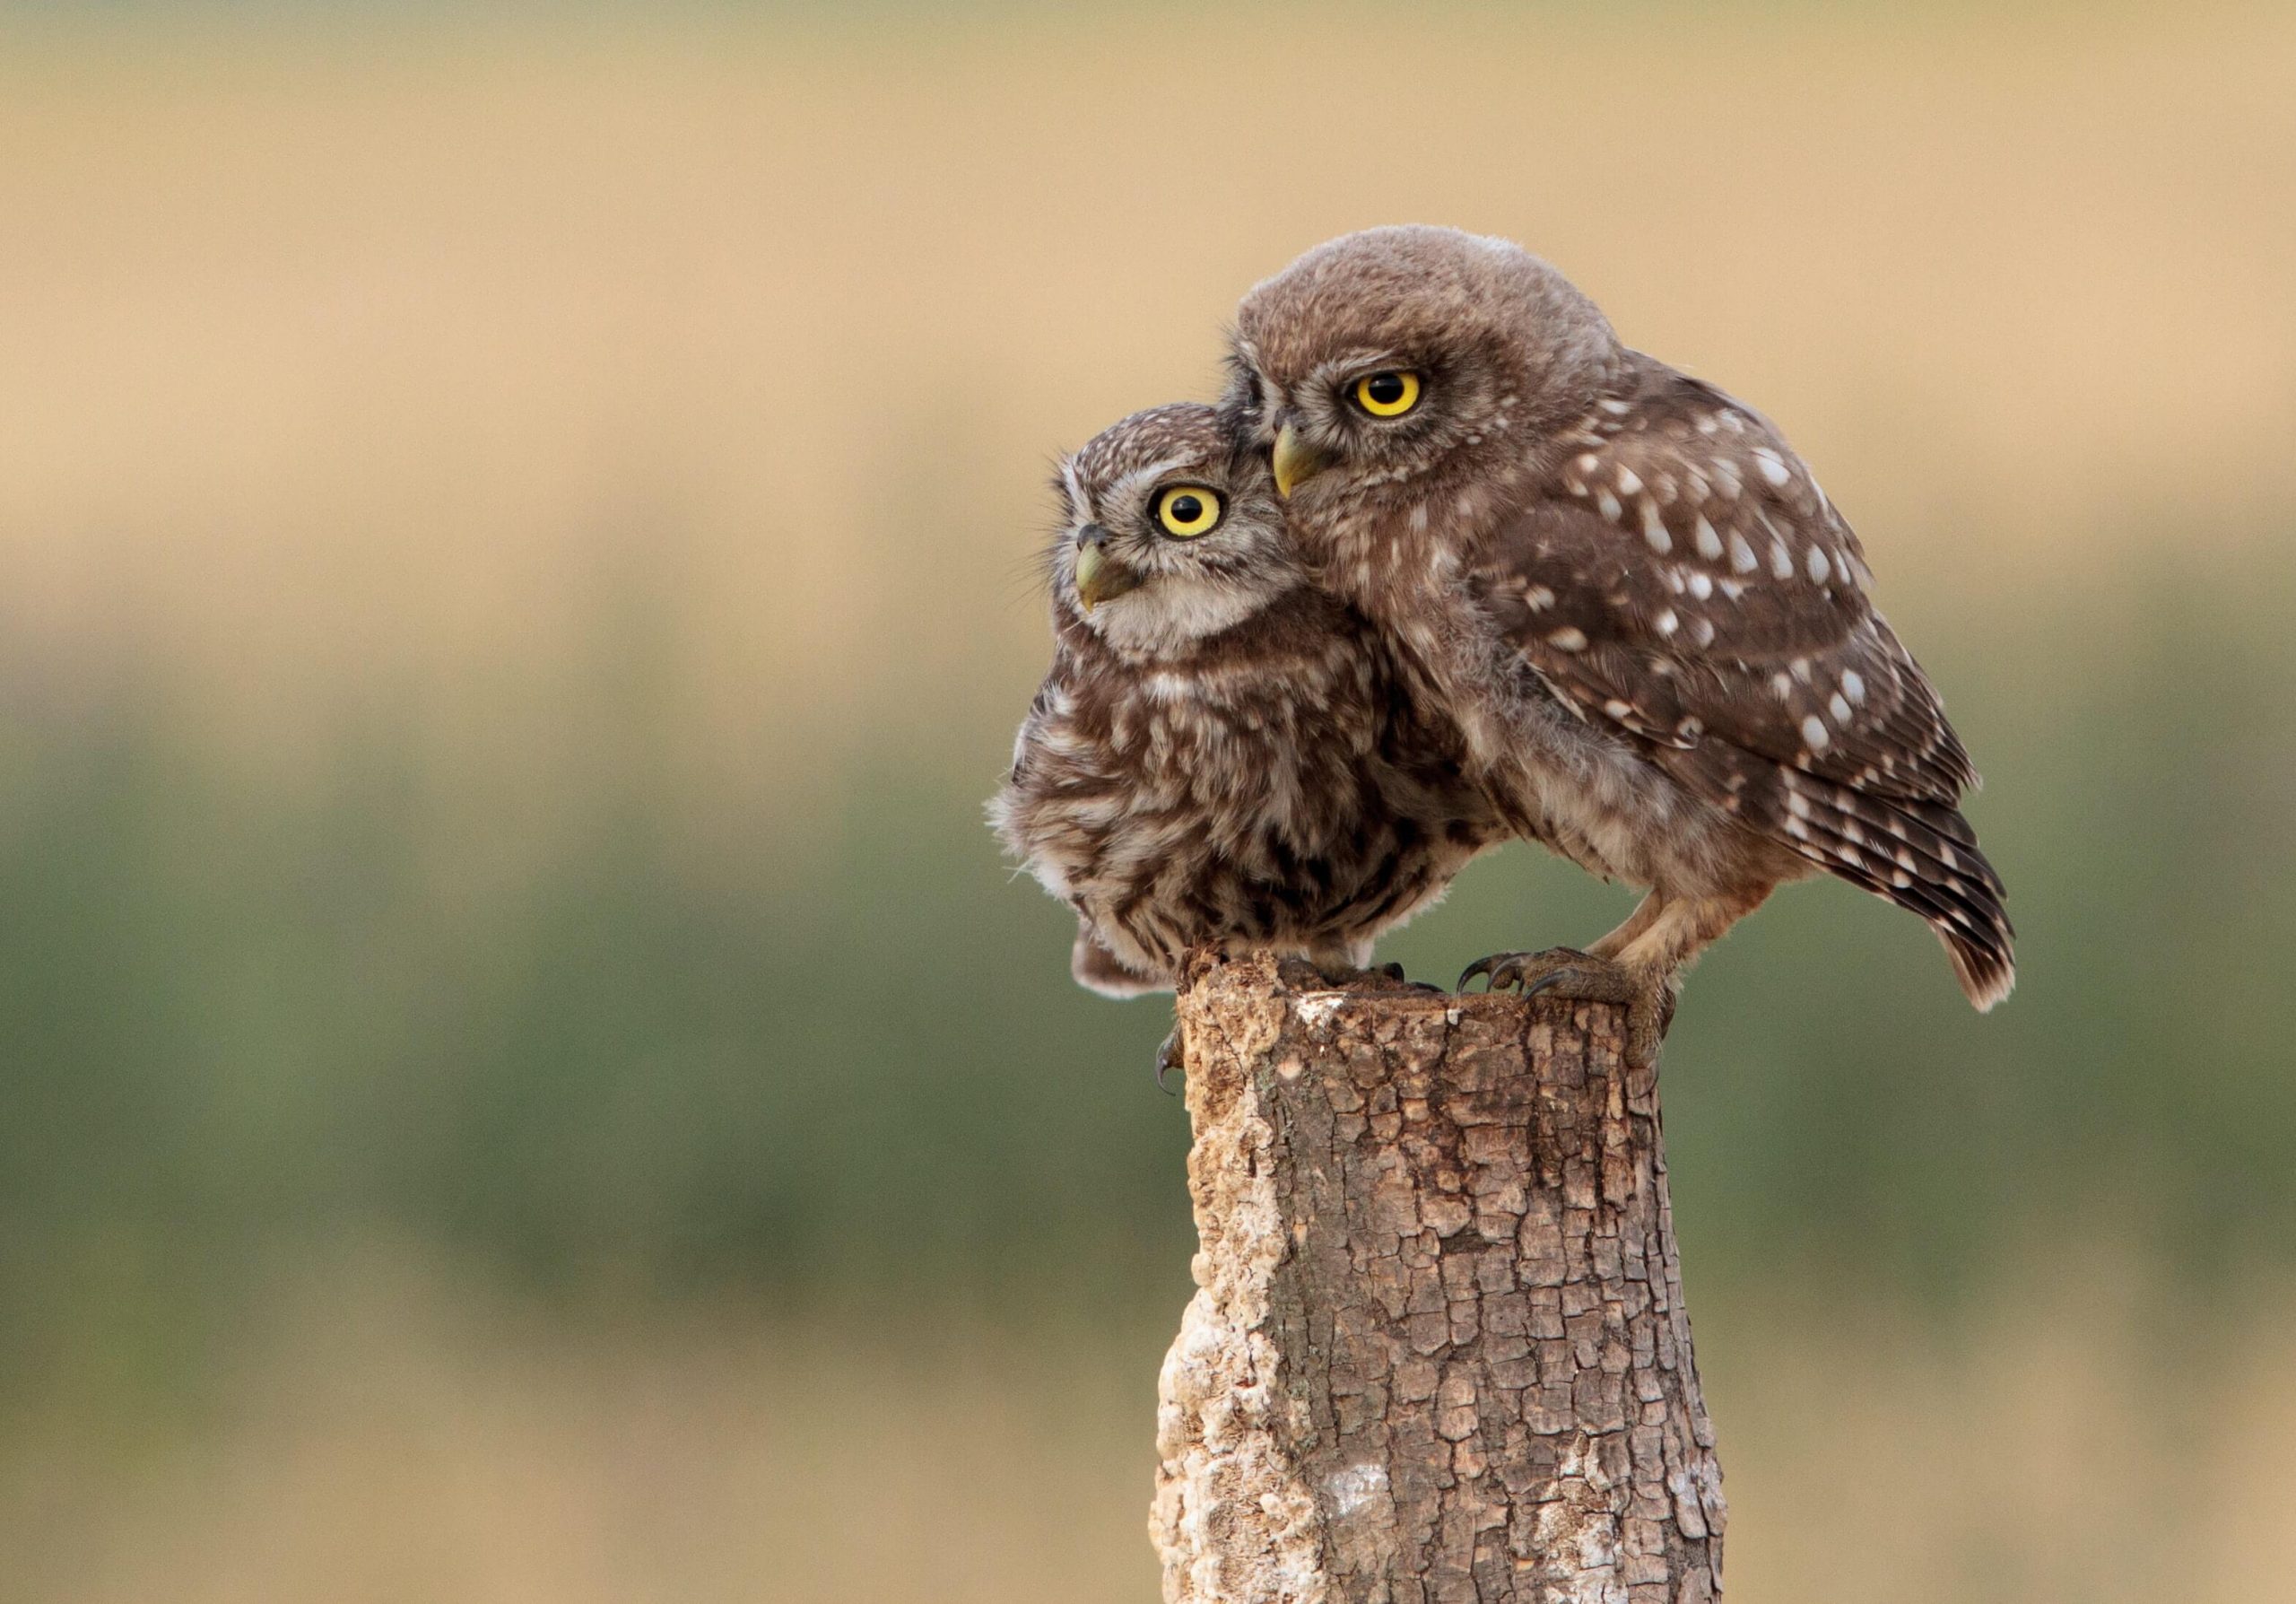 Adopt an owl – an idea for an interesting way to support WWF